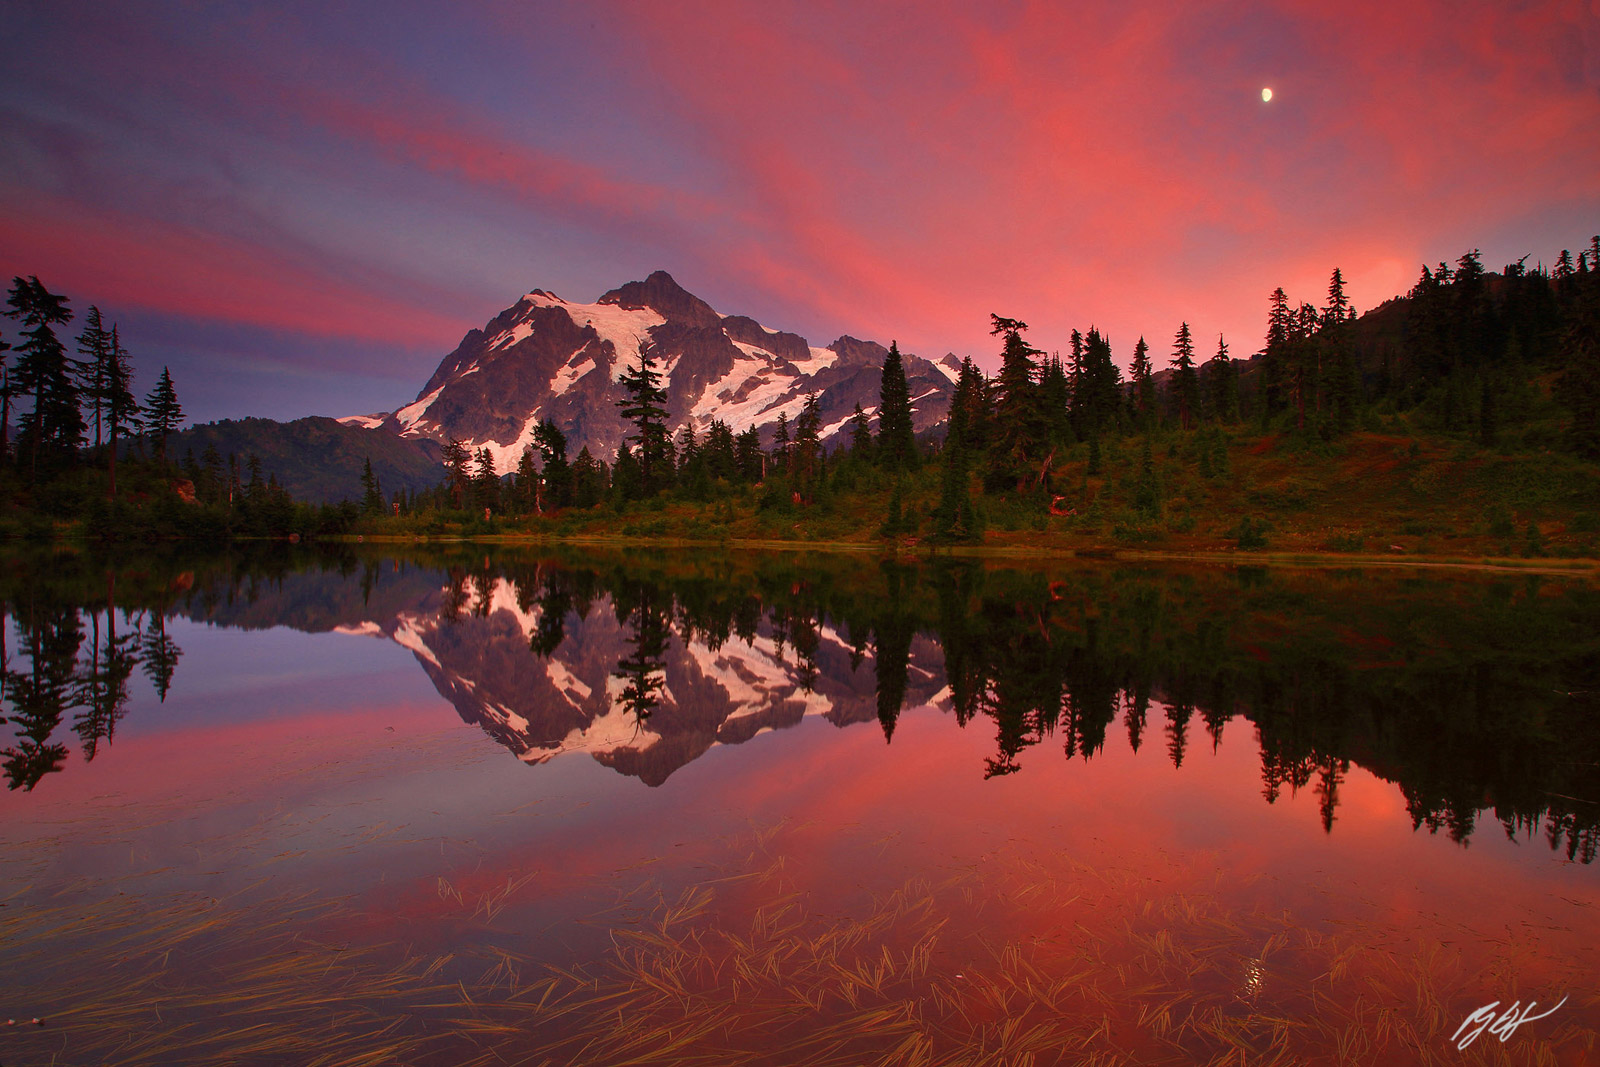 Sunset Mt Shuksan Reflected in Picture Lake from Heather Meadows in the Mt Baker Recreation Area in Washington